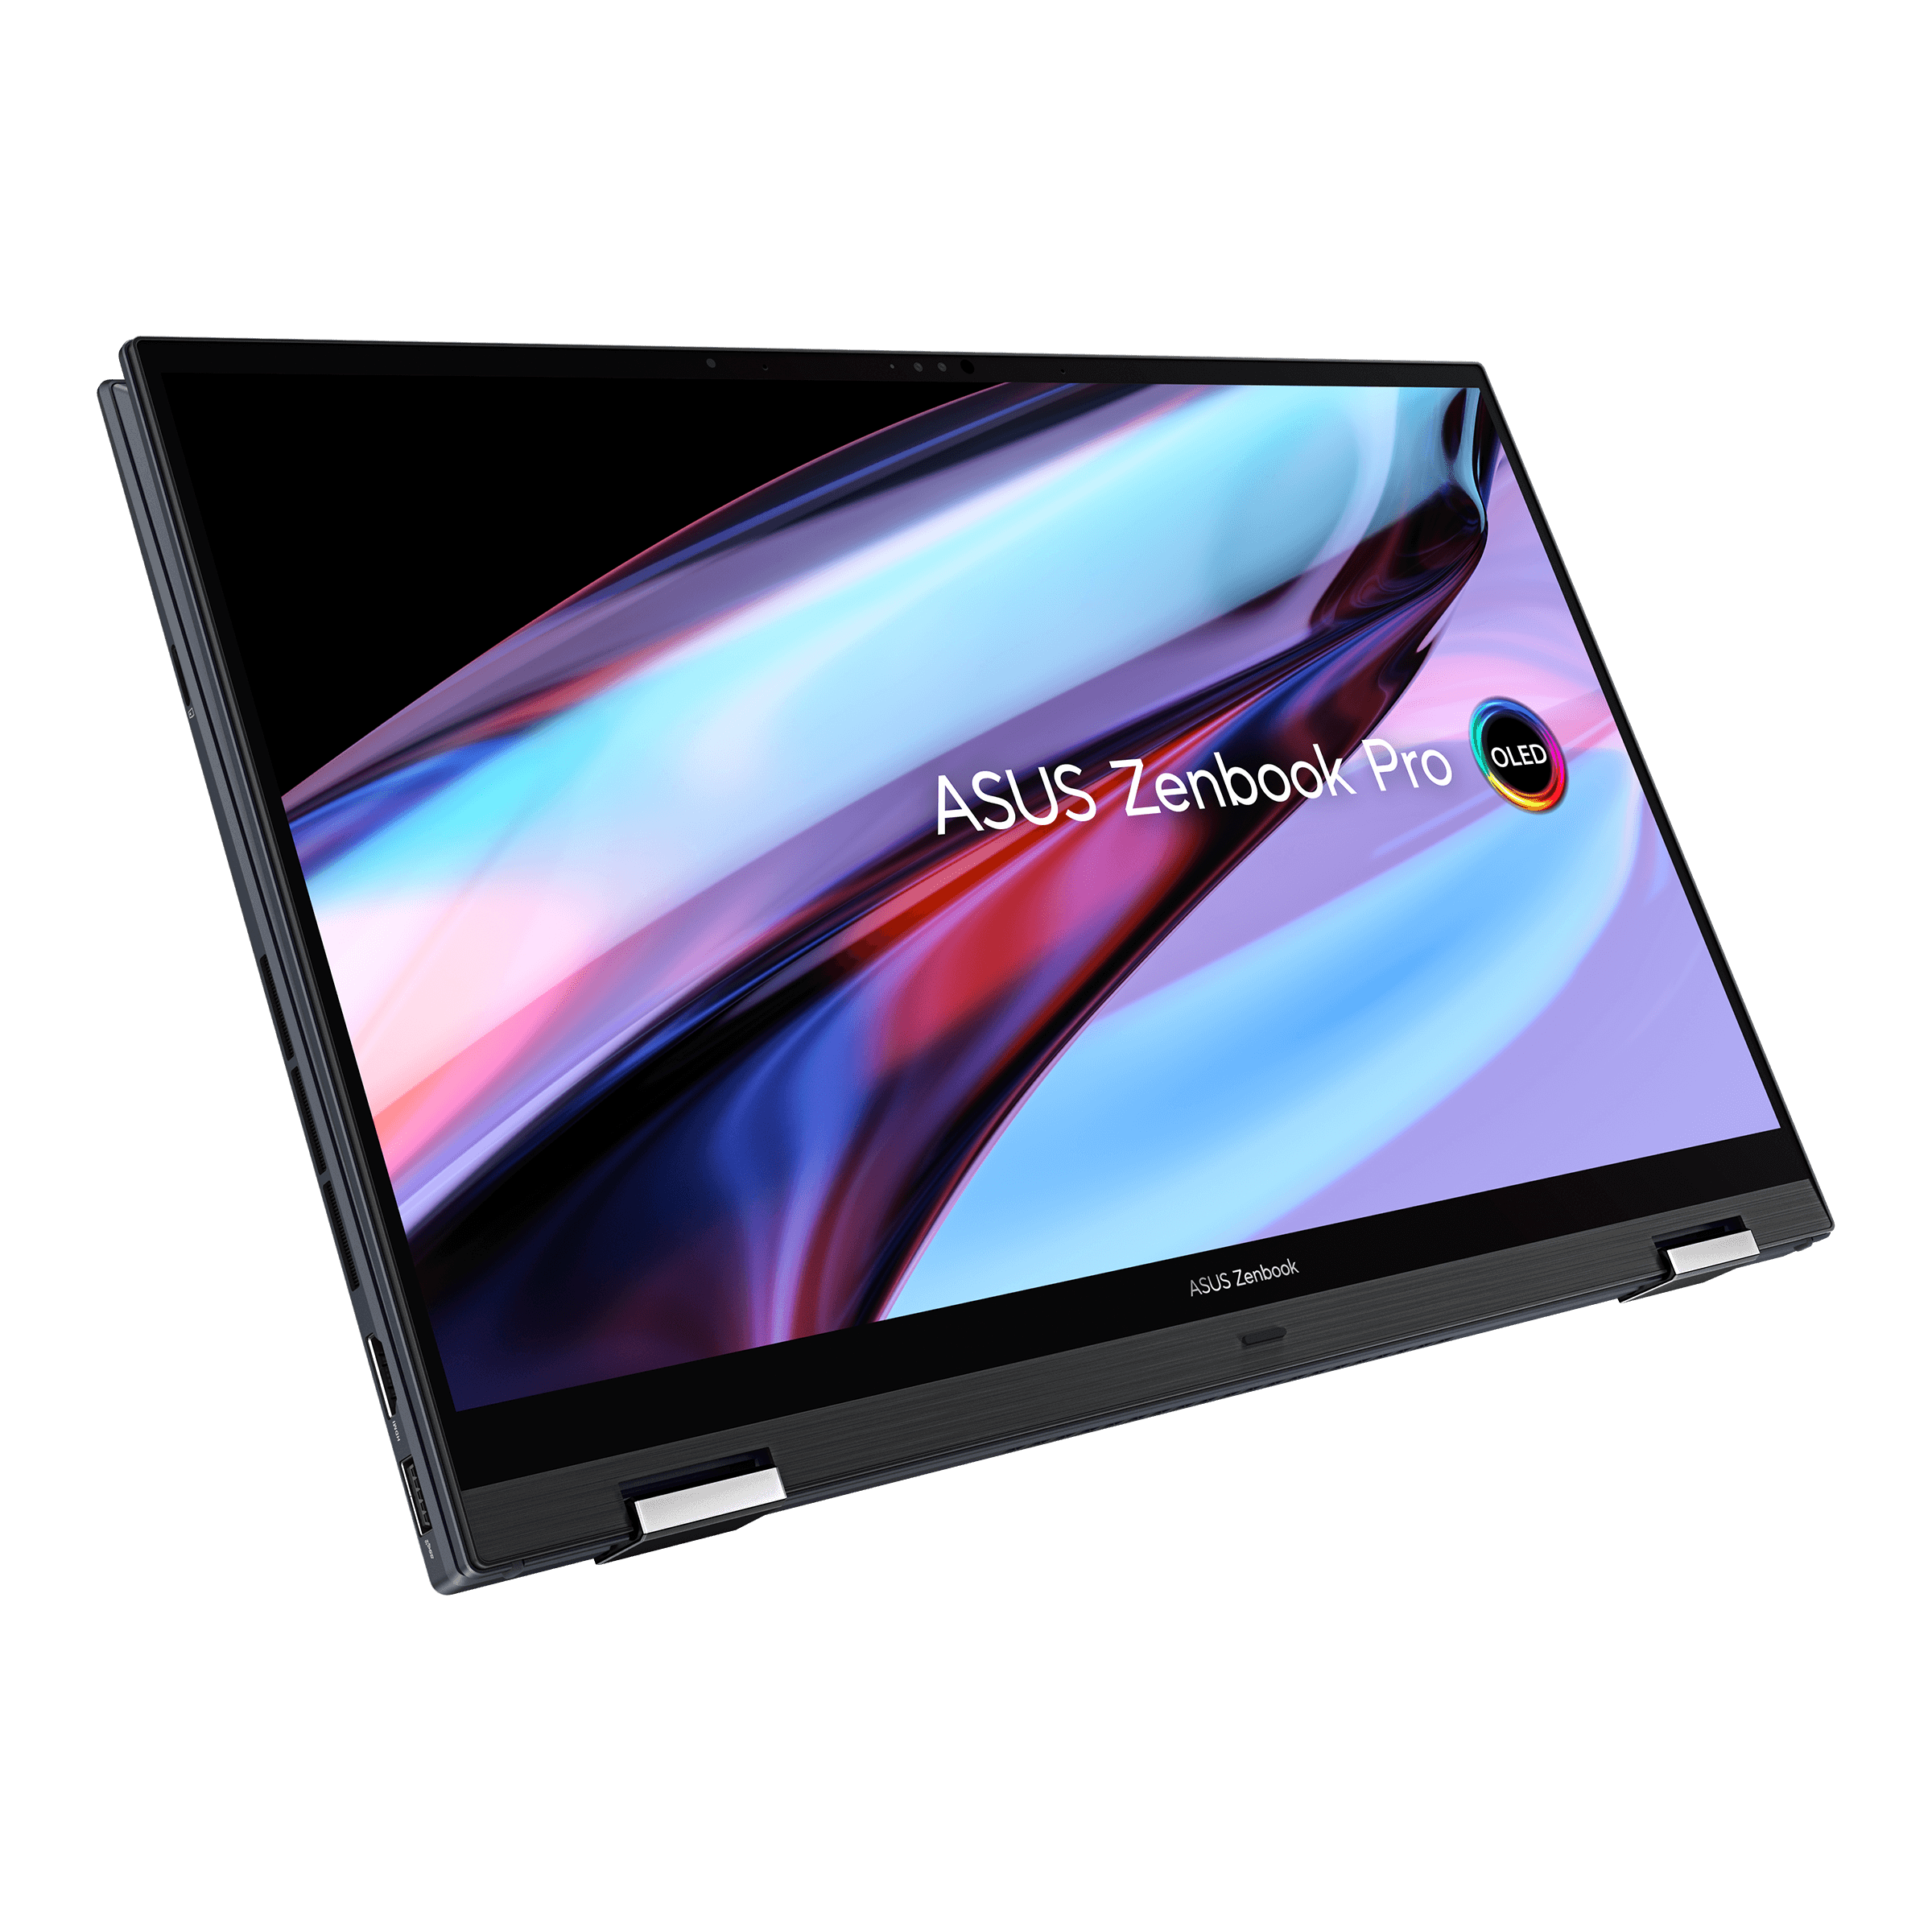 The Zenbook Pro 15 OLED in tablet mode on a white background. The screen displays a multicolor desktop with the Asus Zenbook Pro OLED logo.